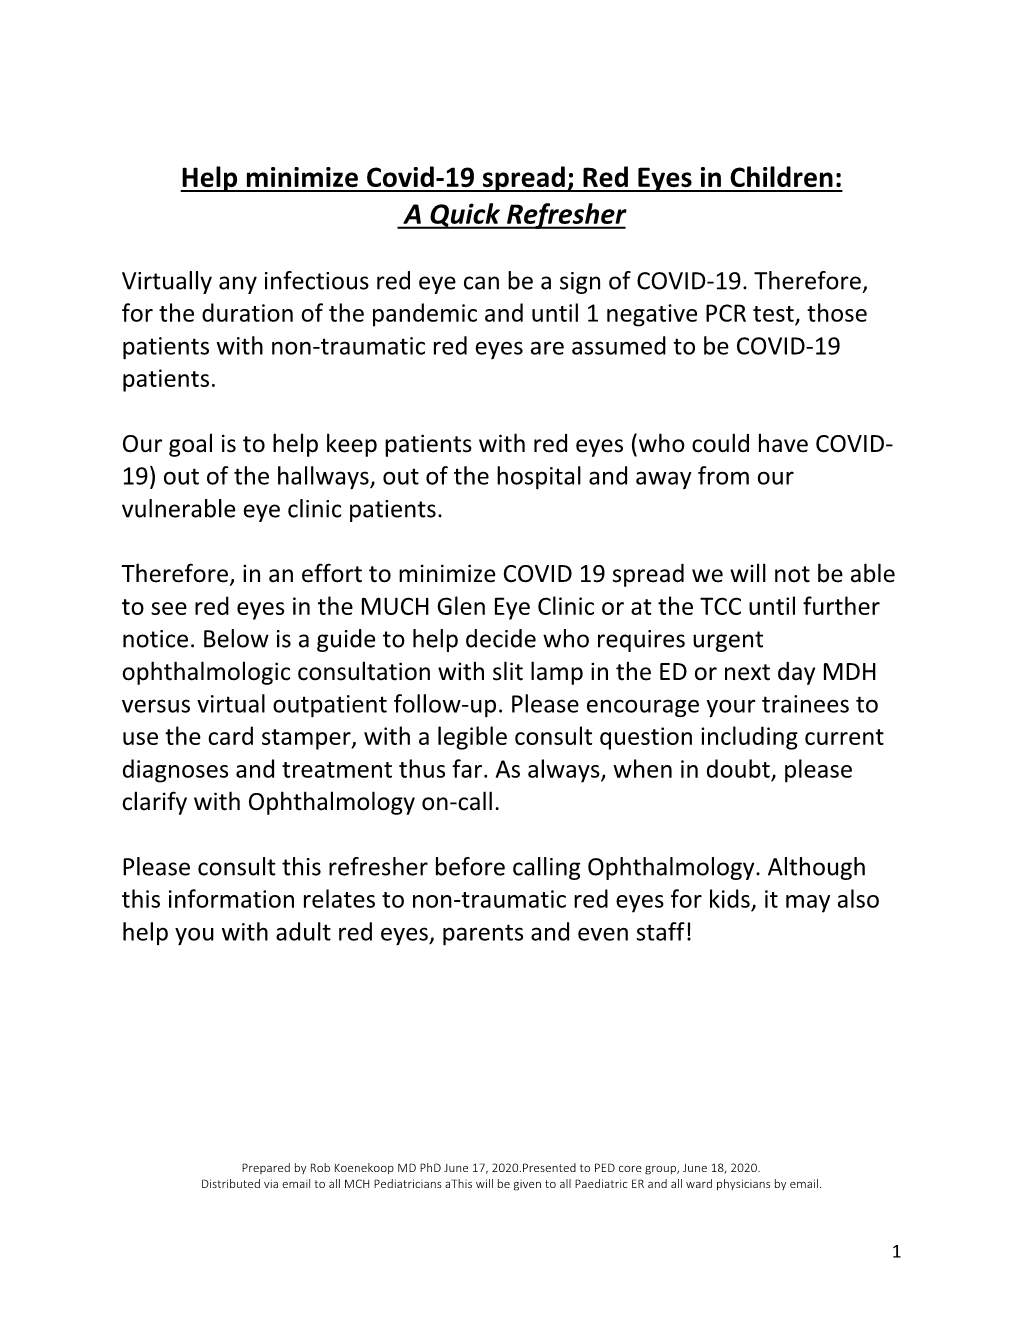 Help Minimize Covid-19 Spread; Red Eyes in Children: a Quick Refresher